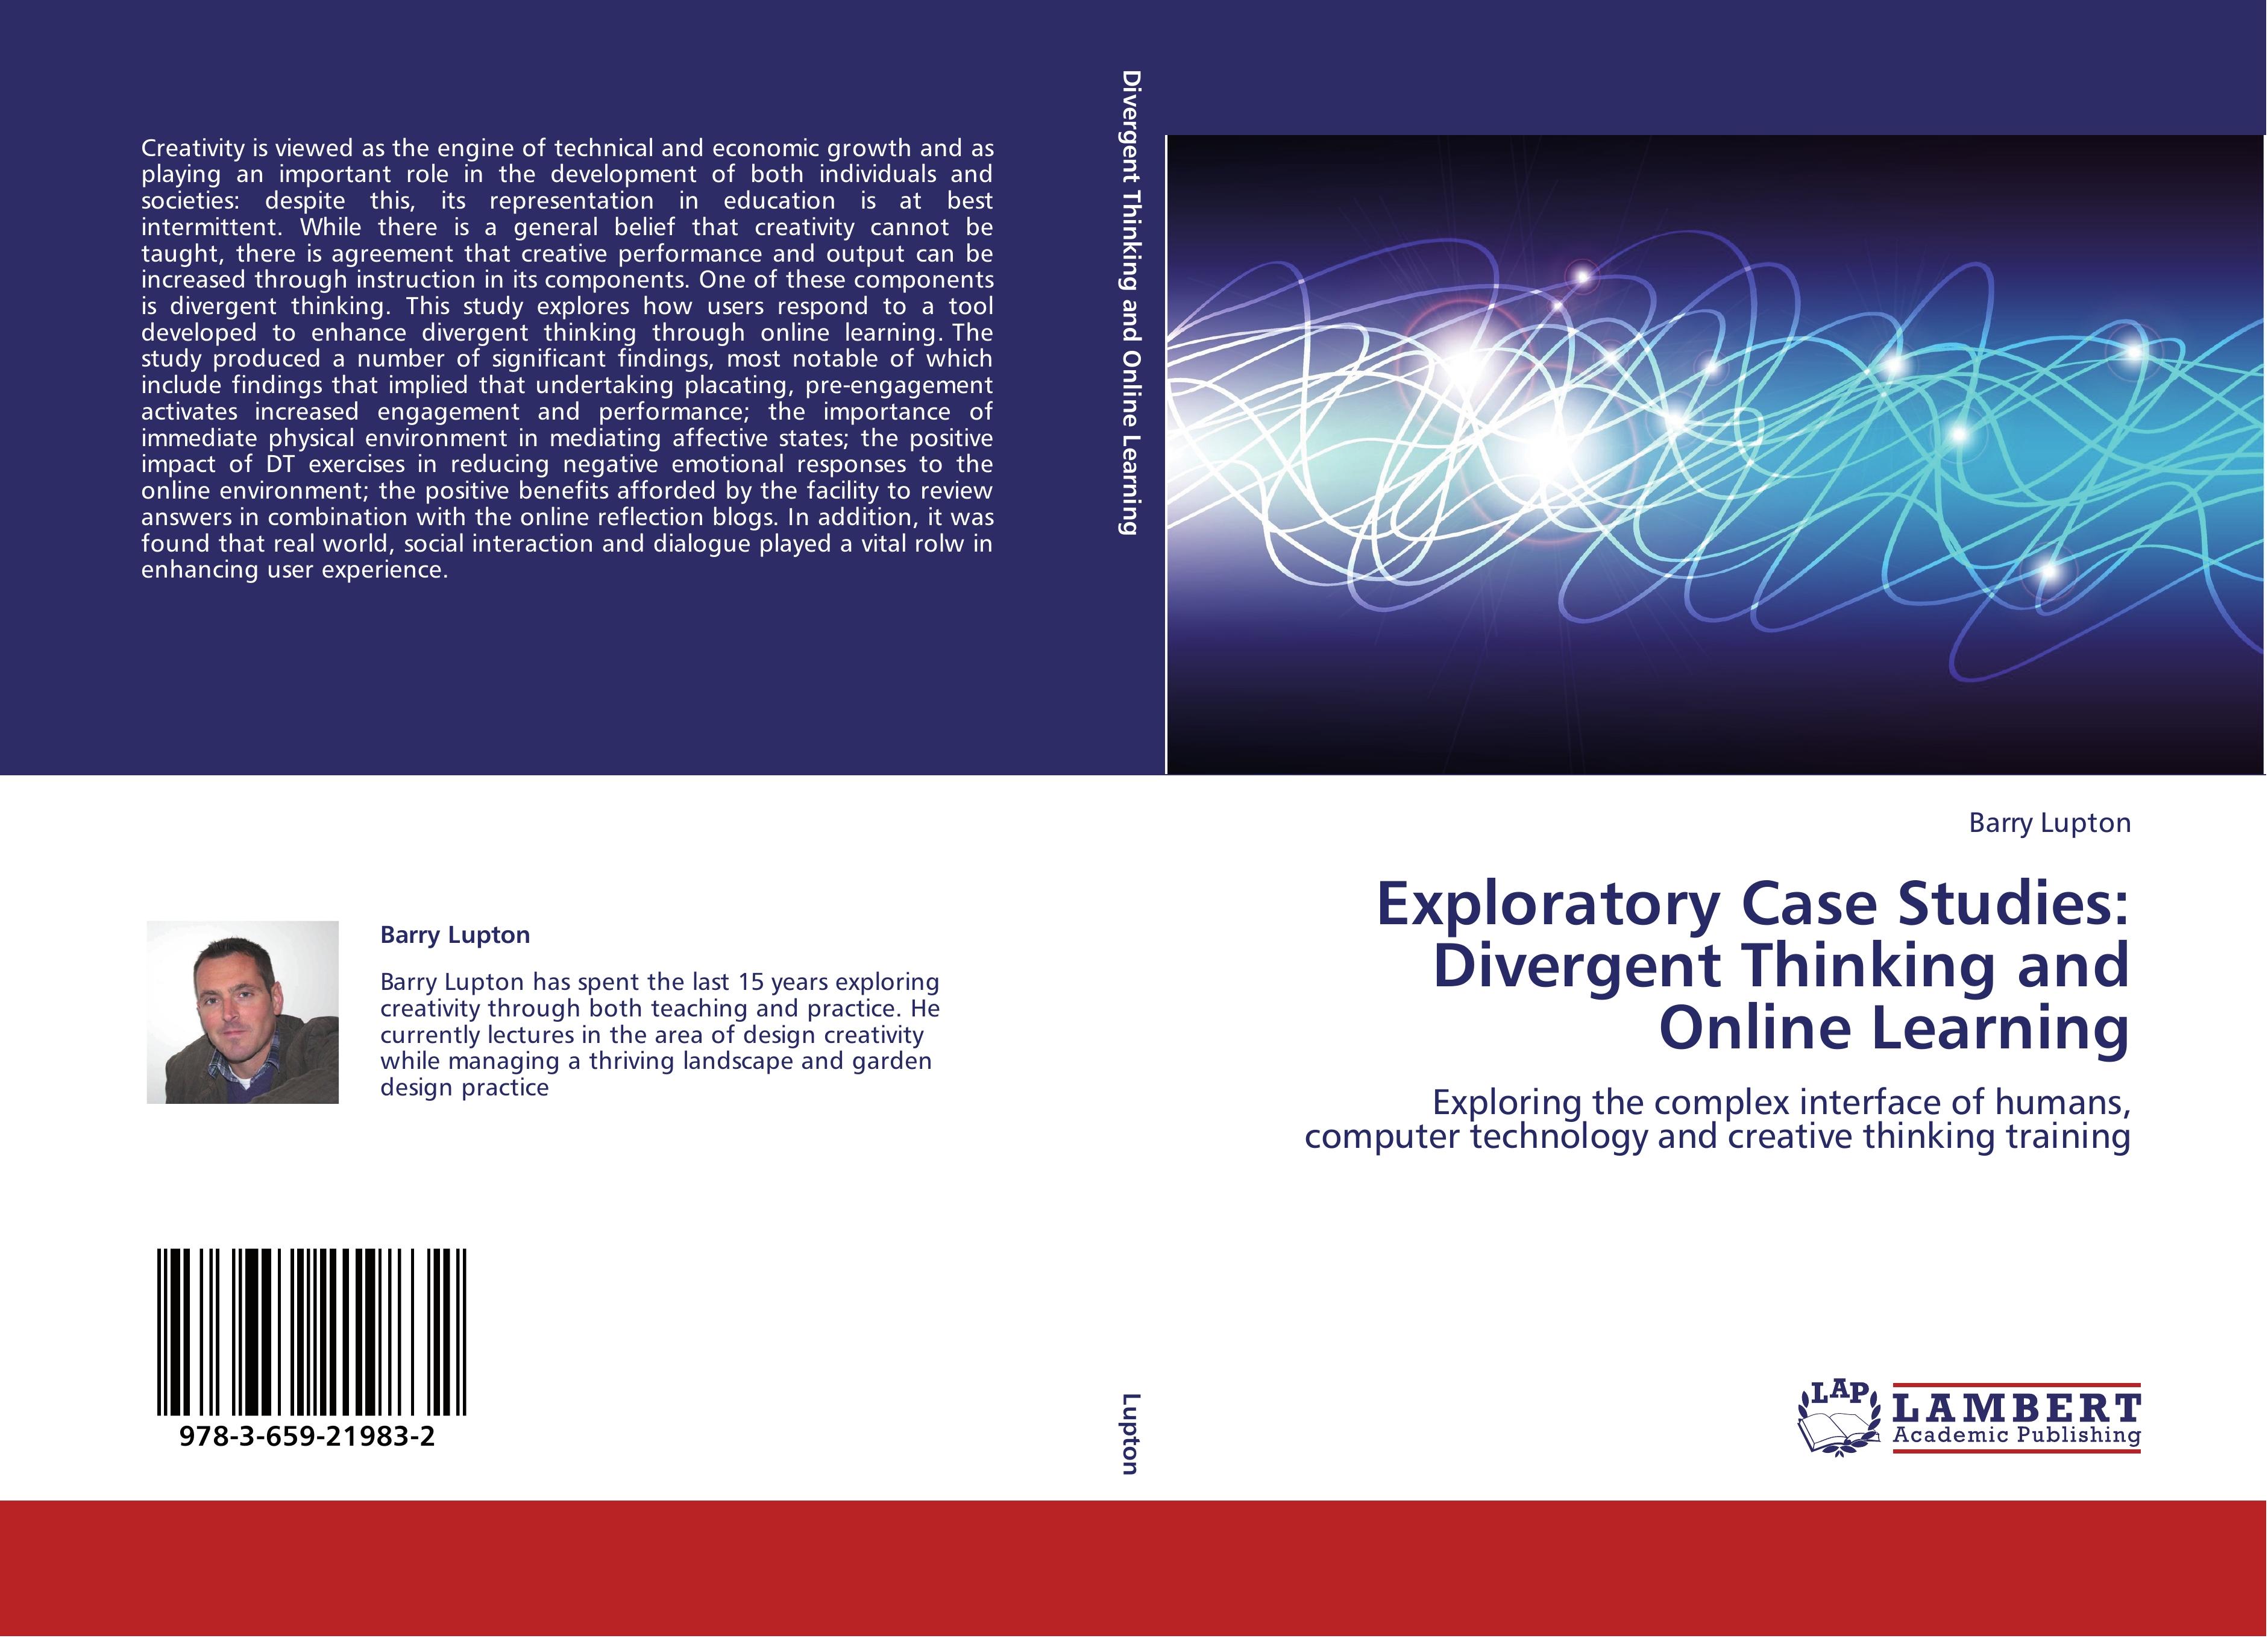 Exploratory Case Studies: Divergent Thinking and Online Learning - Barry Lupton